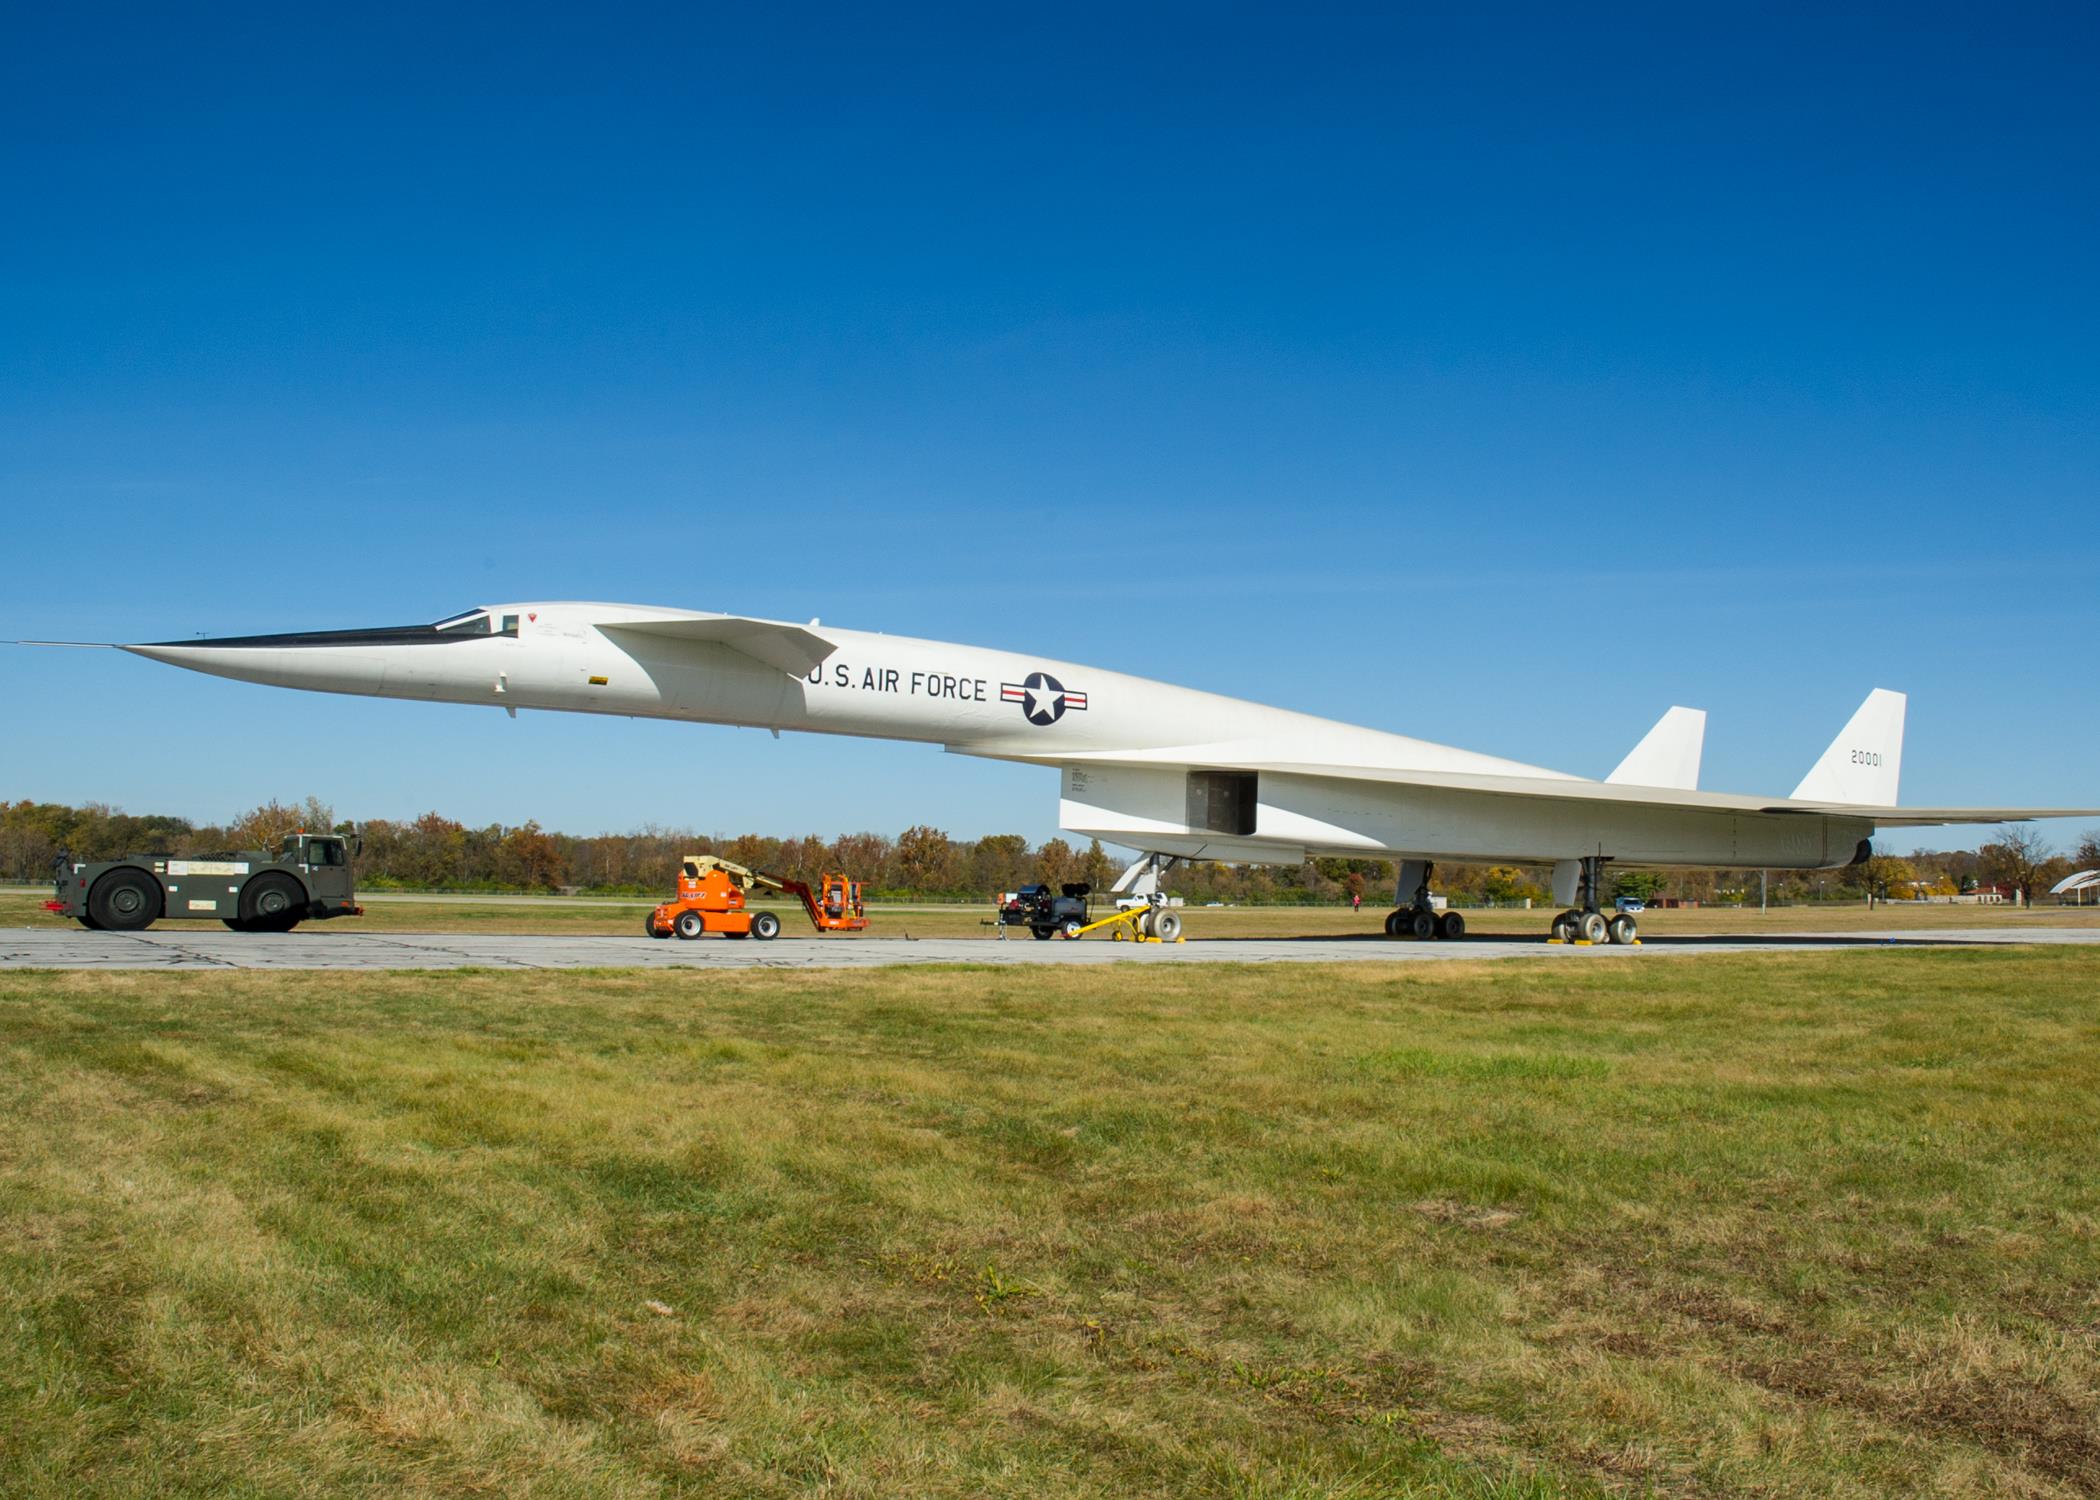 General 2100x1500 XB-70 Valkyrie Bomber US Air Force Supersonic Bomber military military vehicle vehicle aircraft military aircraft